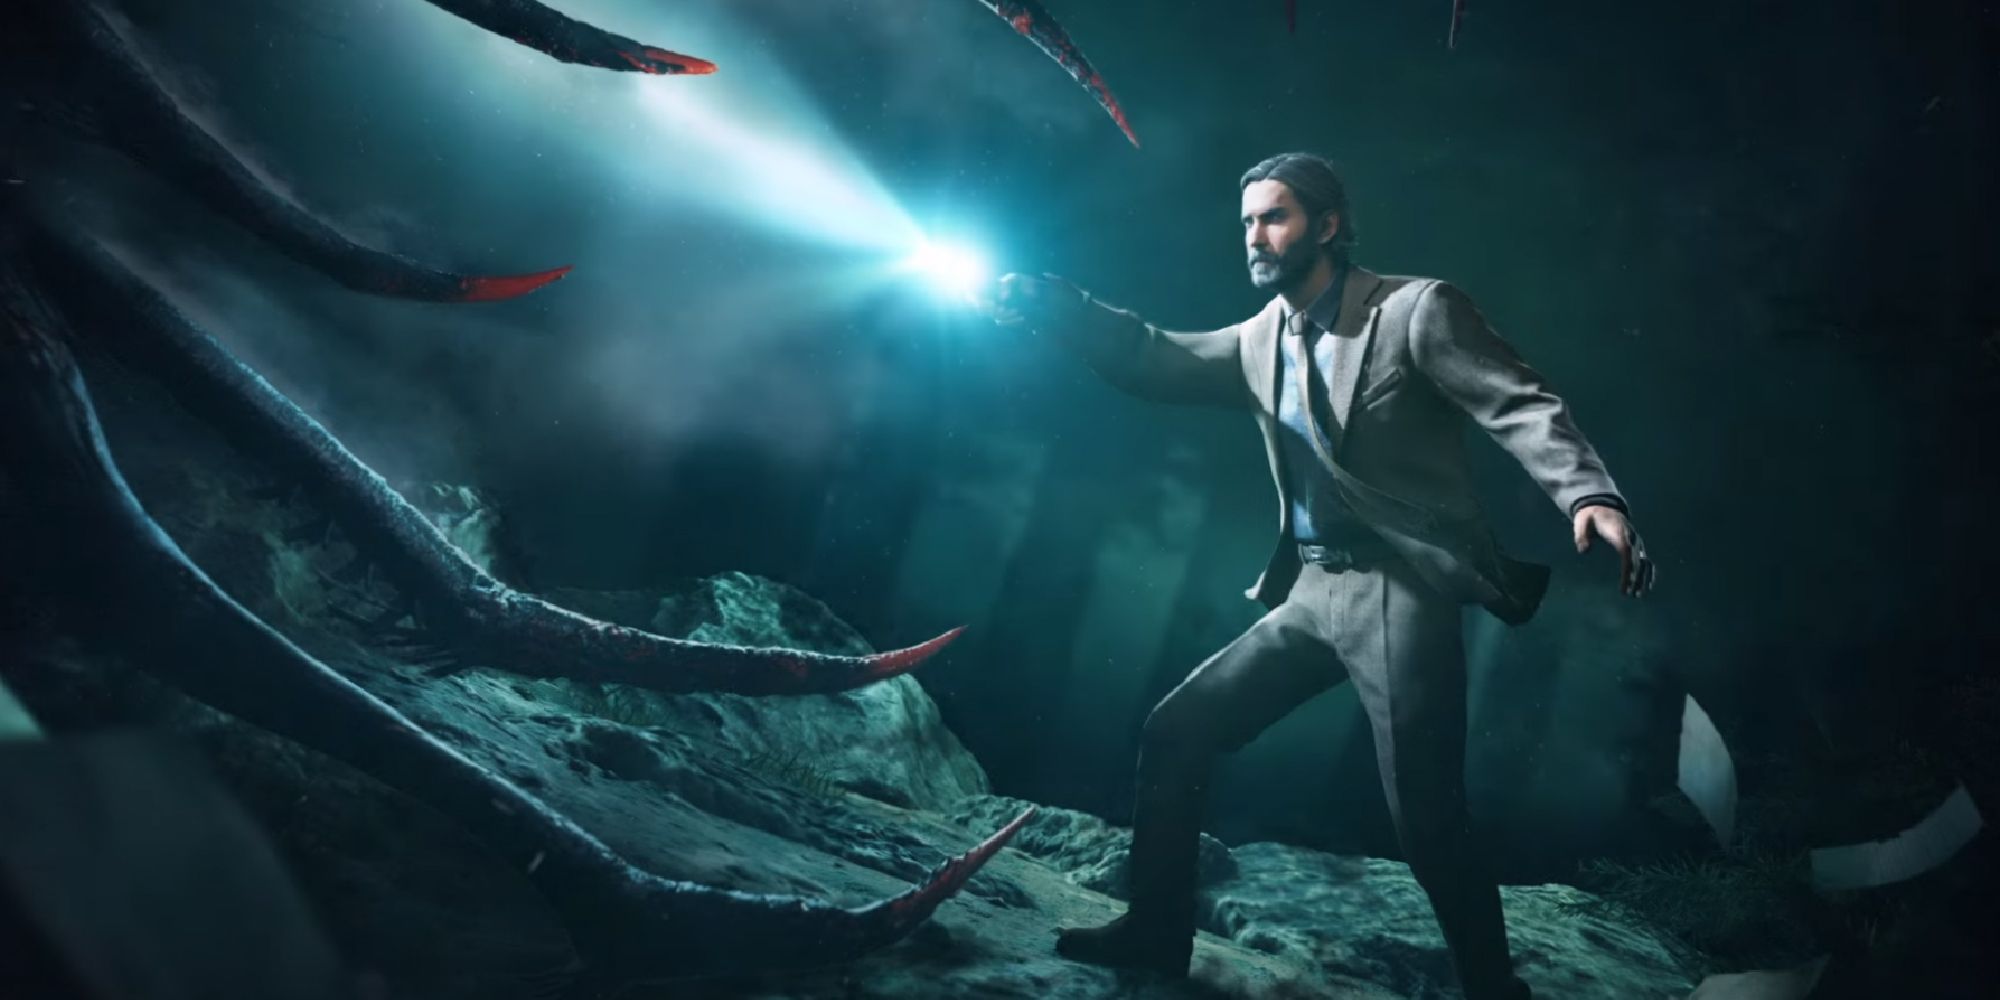 Alan Wake shining a flashlight at a monster in Dead by Daylight as his manuscript scatters around him